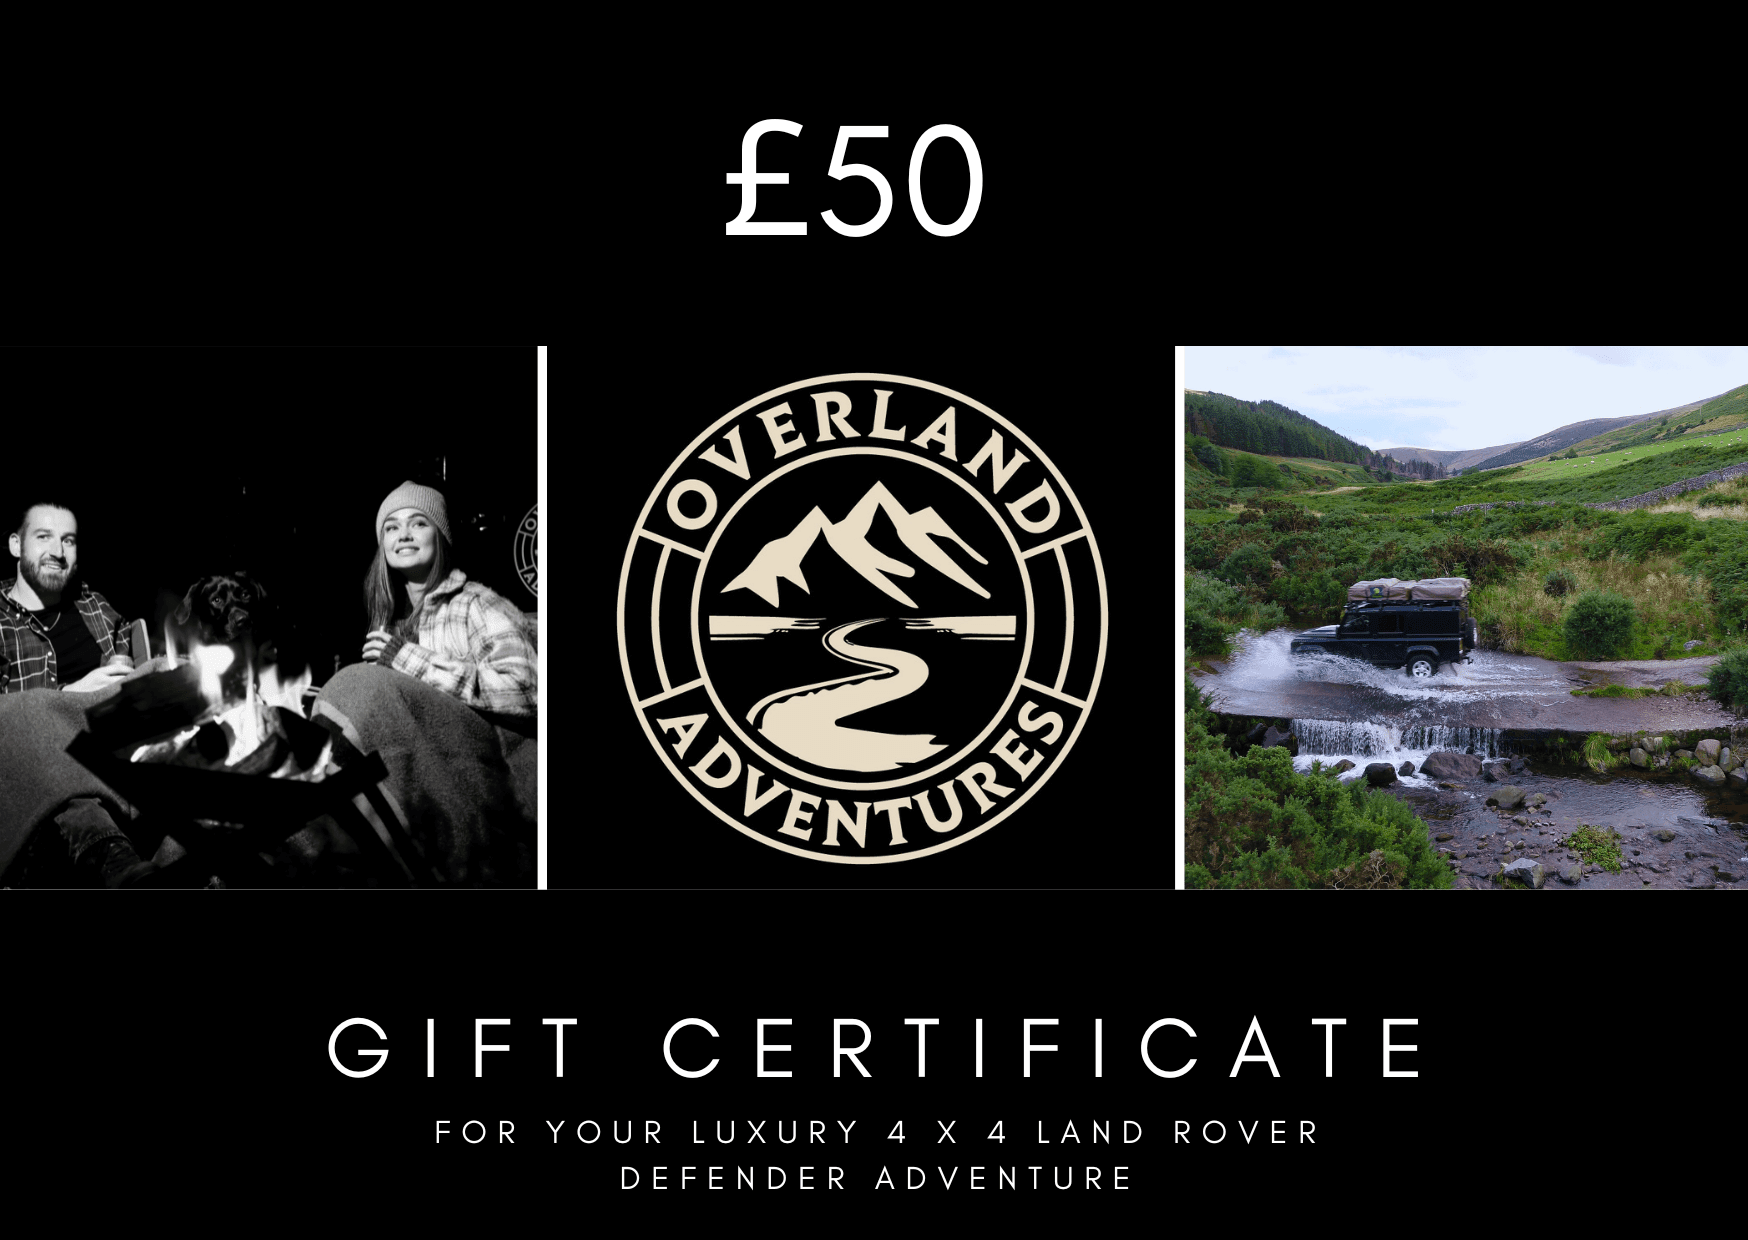 Landrover Defender Hire Northumberland £50 Gift Card